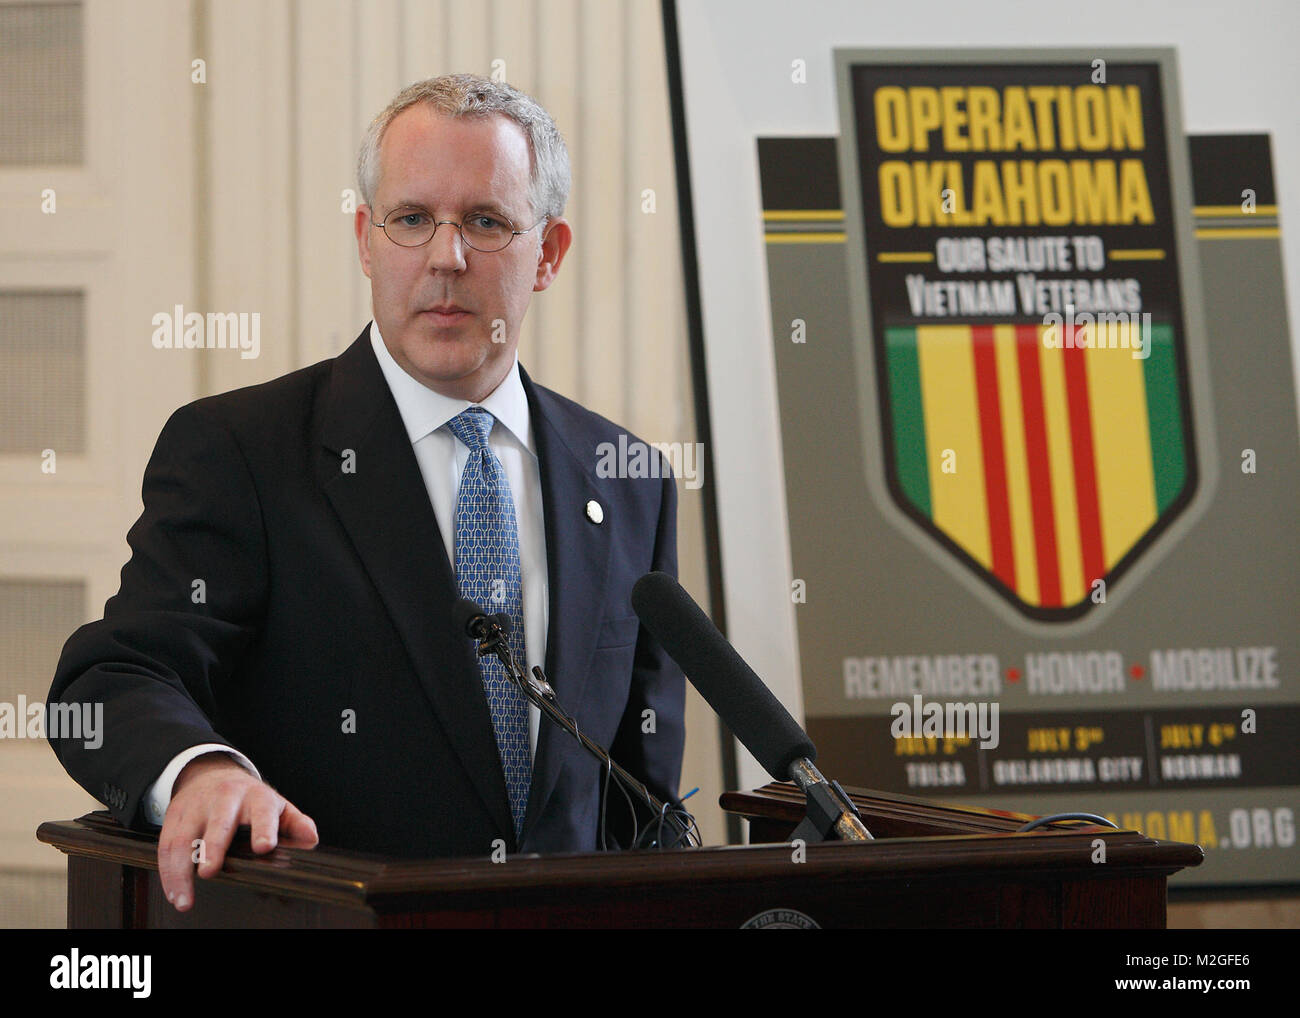 Oklahoma Governor Brad Henry delivers his comments on Operation Oklahoma;  the salute to Vietnam Veterans. Operation Oklahoma Press Conference 03 by  Oklahoma National Guard Stock Photo - Alamy